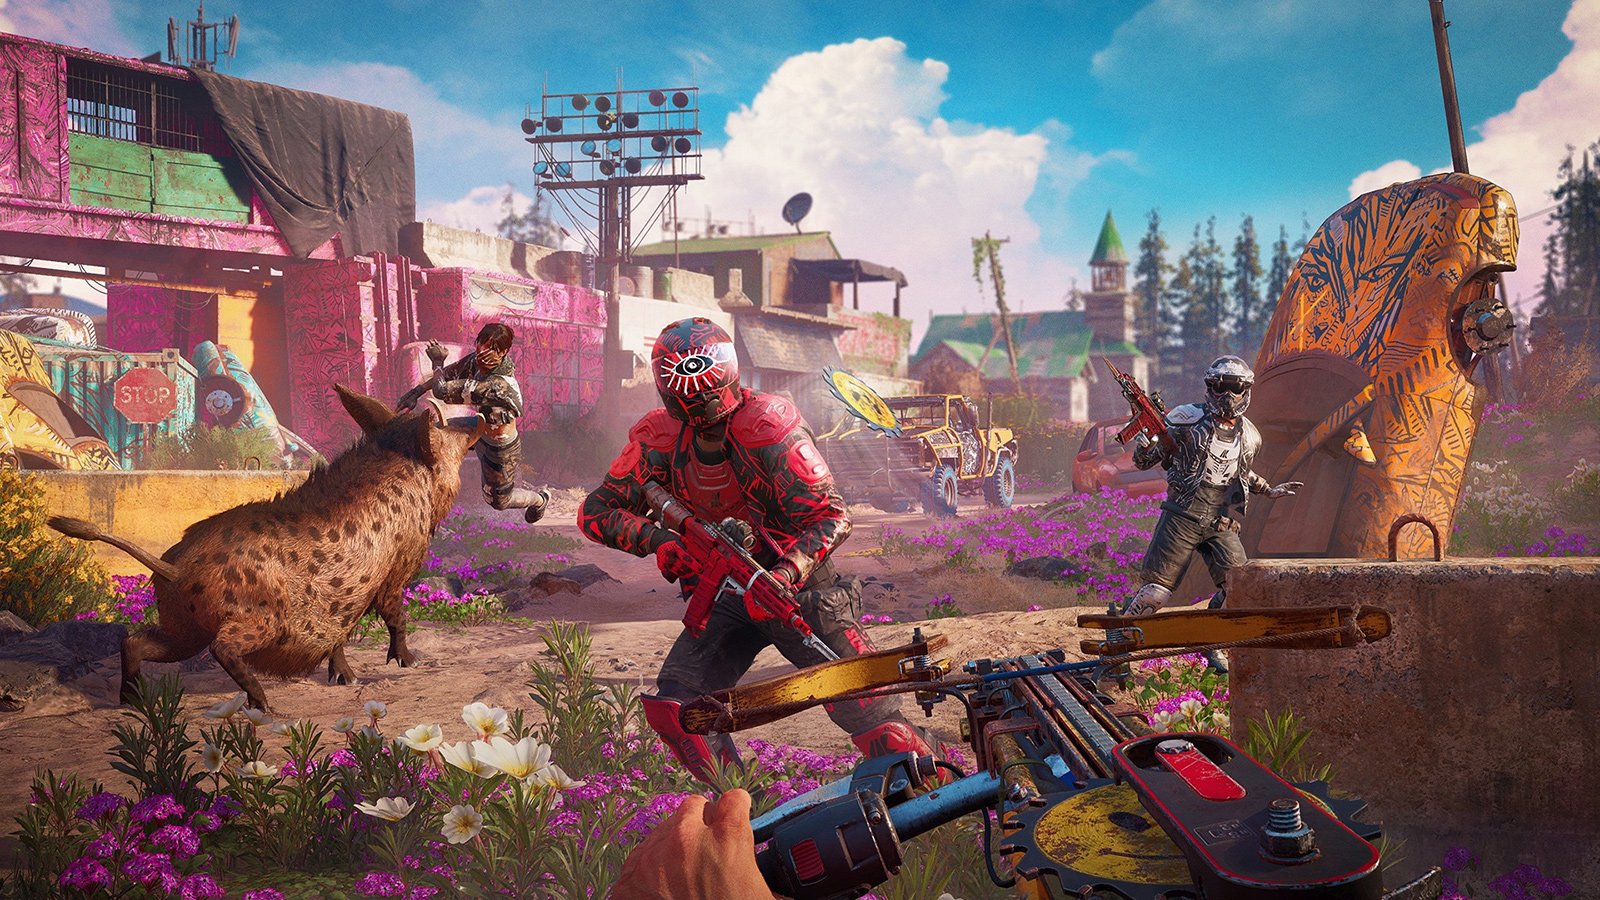 Far Cry 6 review for Xbox Series X, PS5, PC - Gaming Age